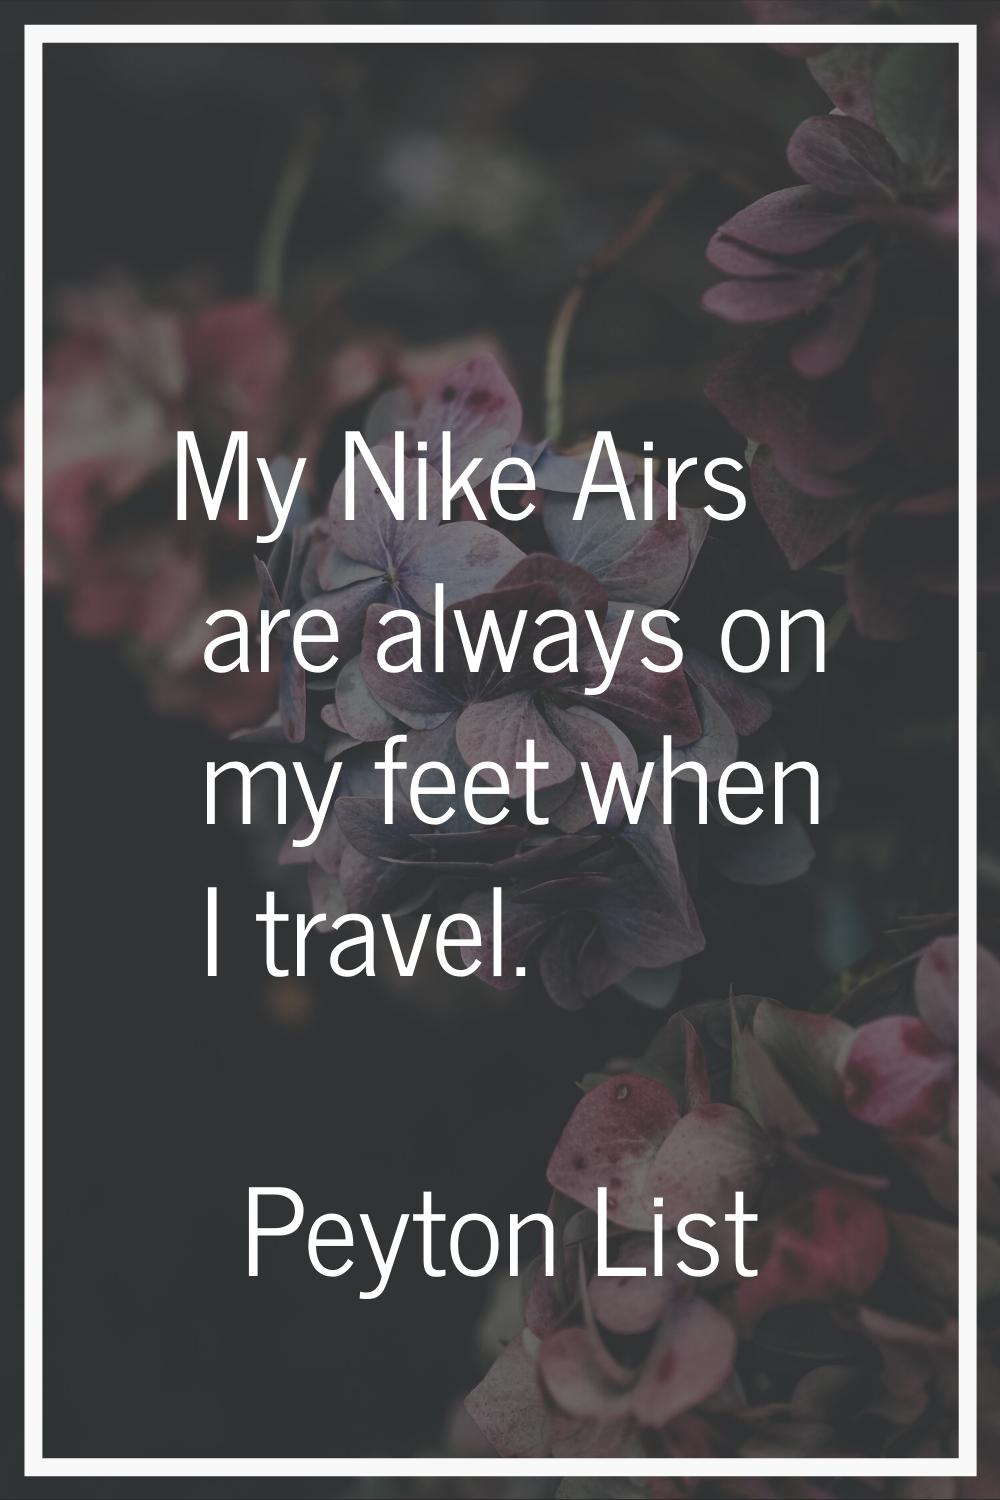 My Nike Airs are always on my feet when I travel.